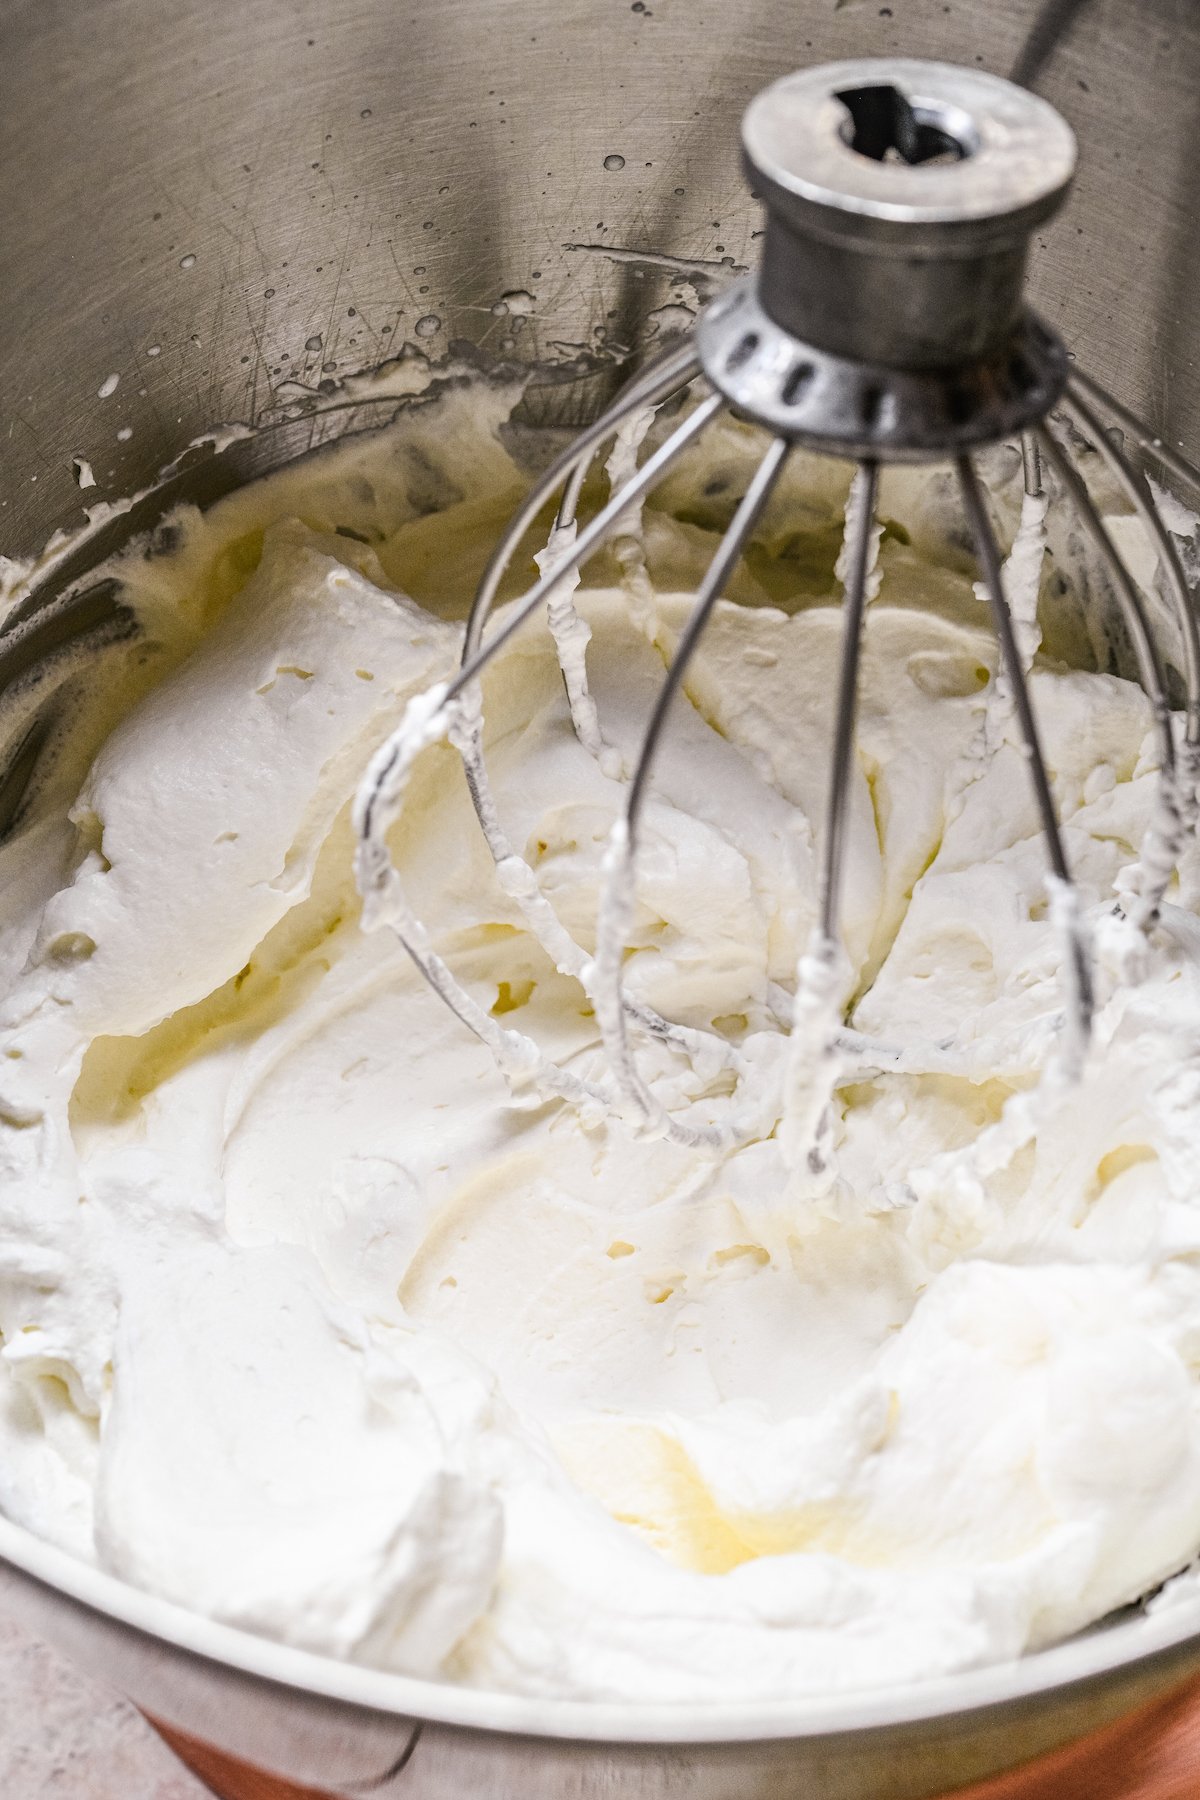 Heavy cream whipped into stiff peaks in a mixing bowl with the whisk mixer attachment inside.